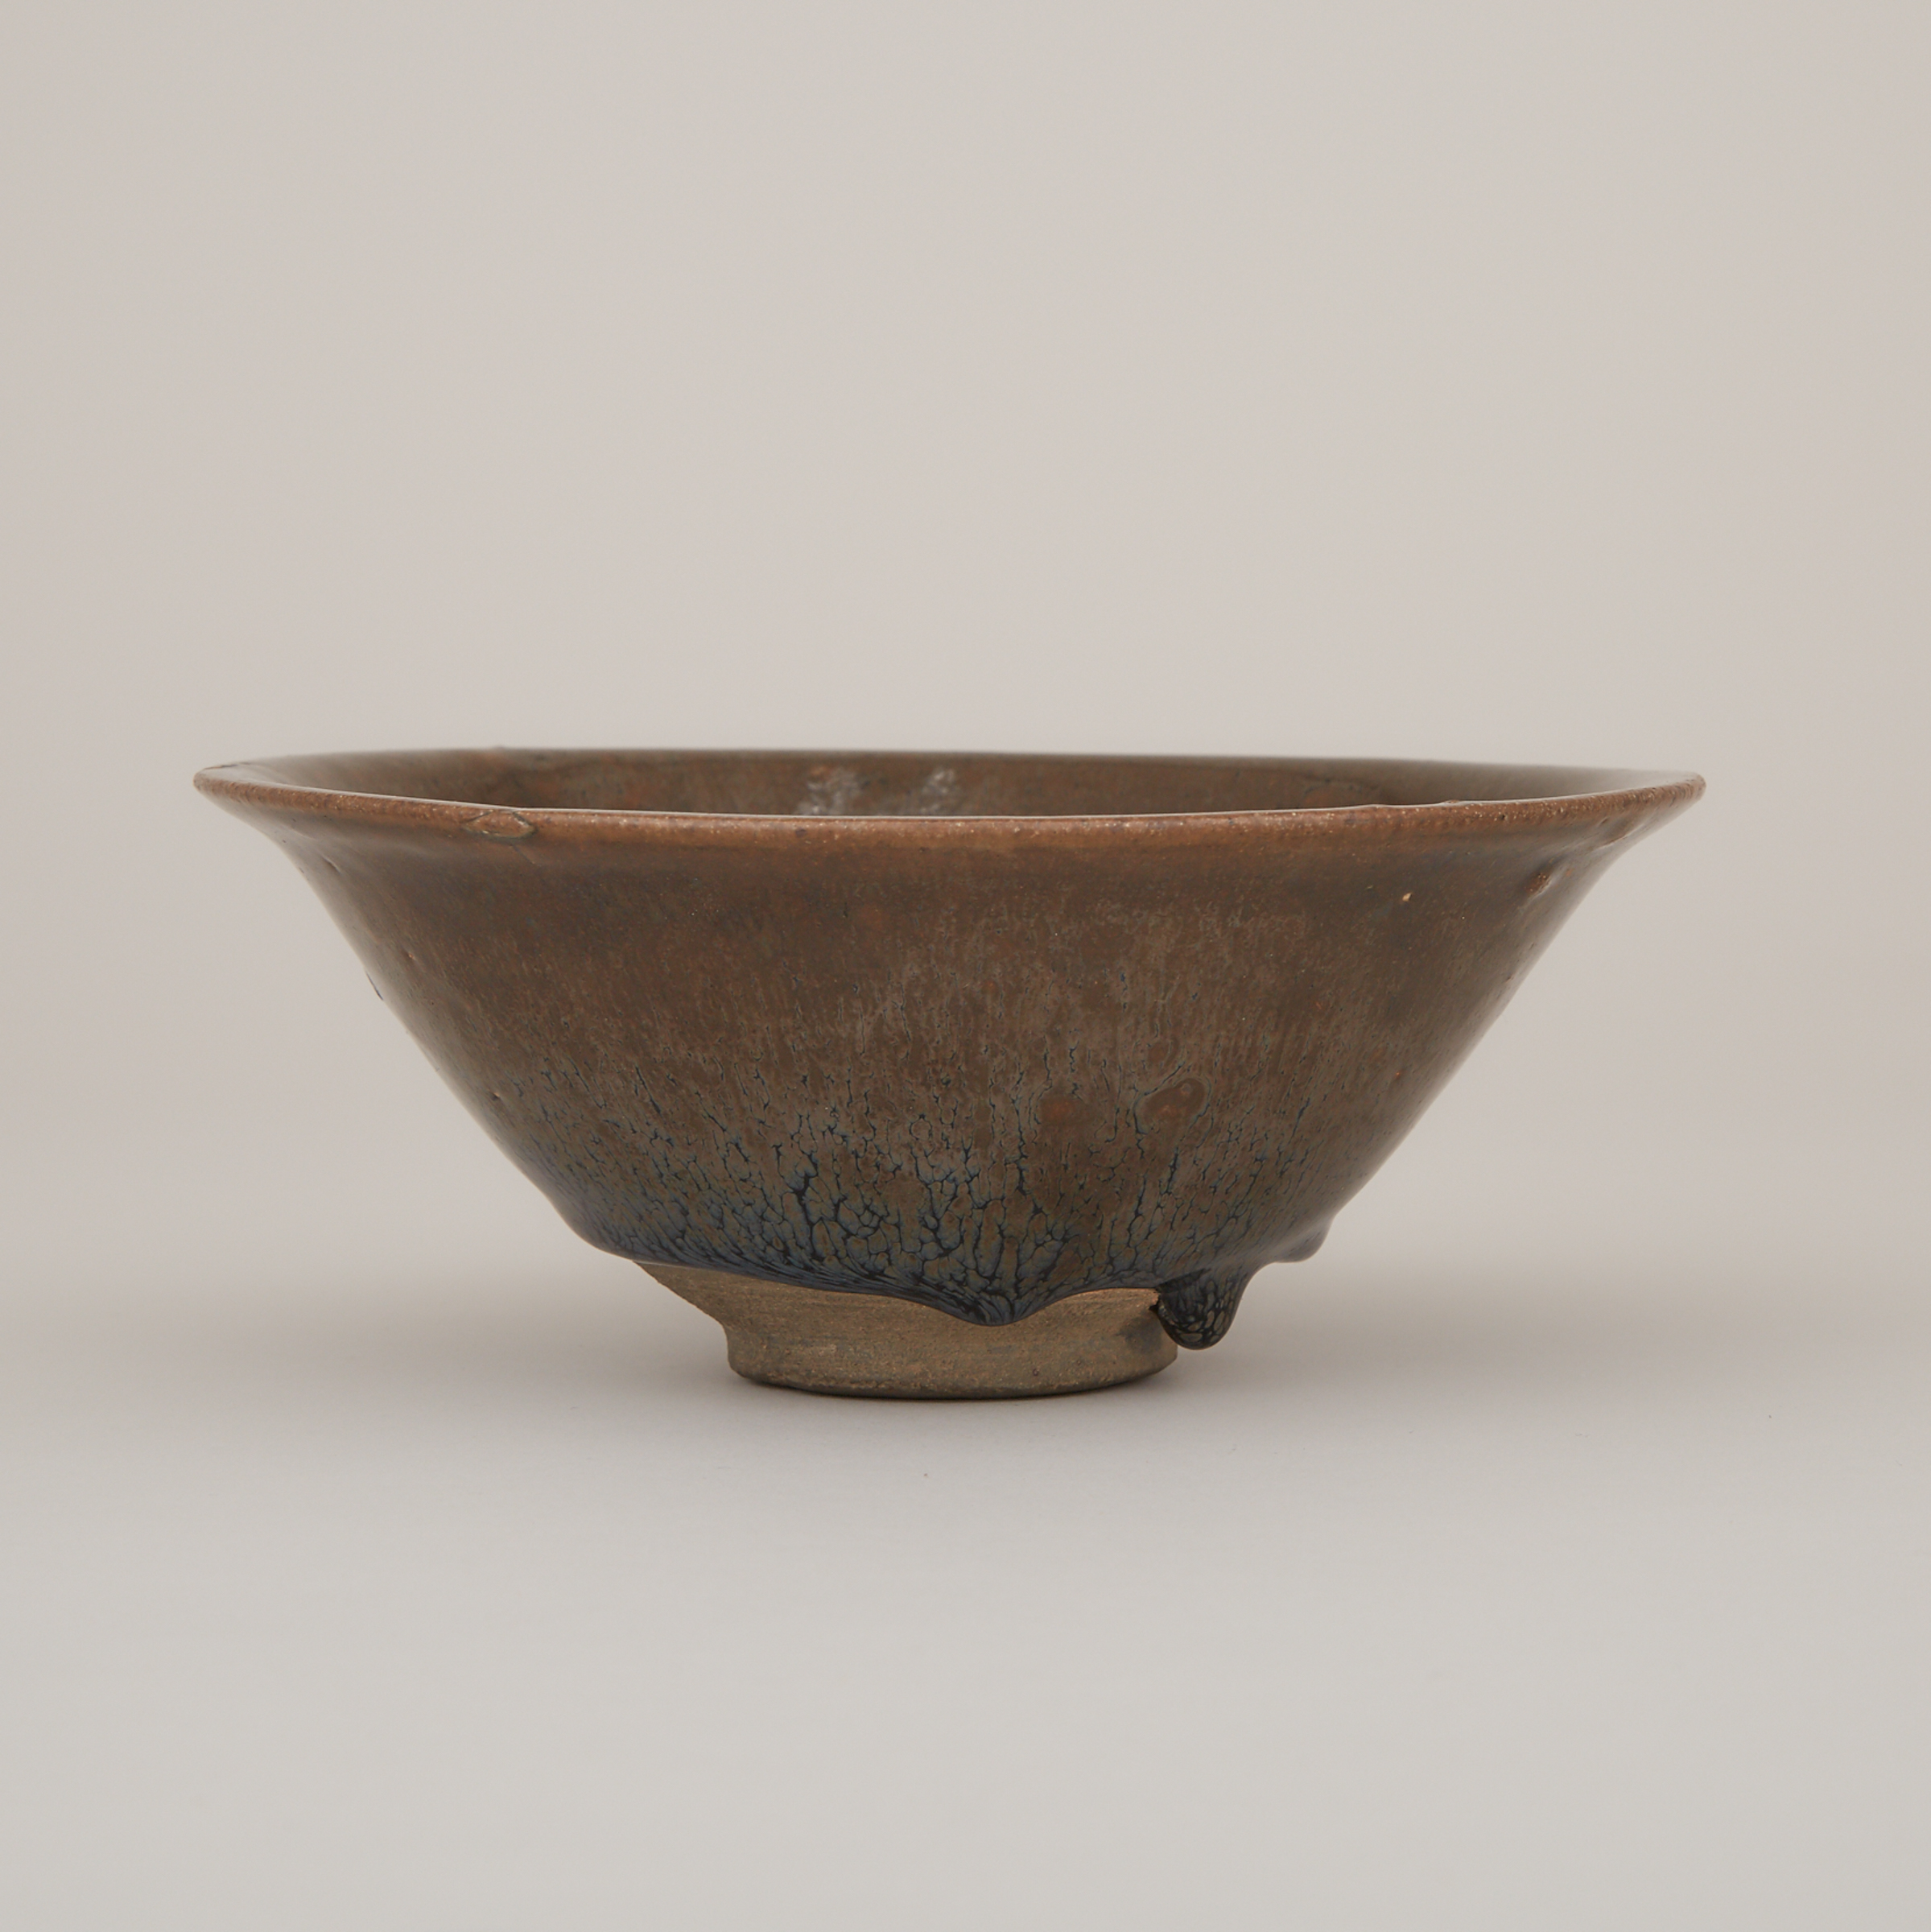 A Large Jian 'Hare's Fur' Flared-Rim Bowl, Southern Song Dynasty